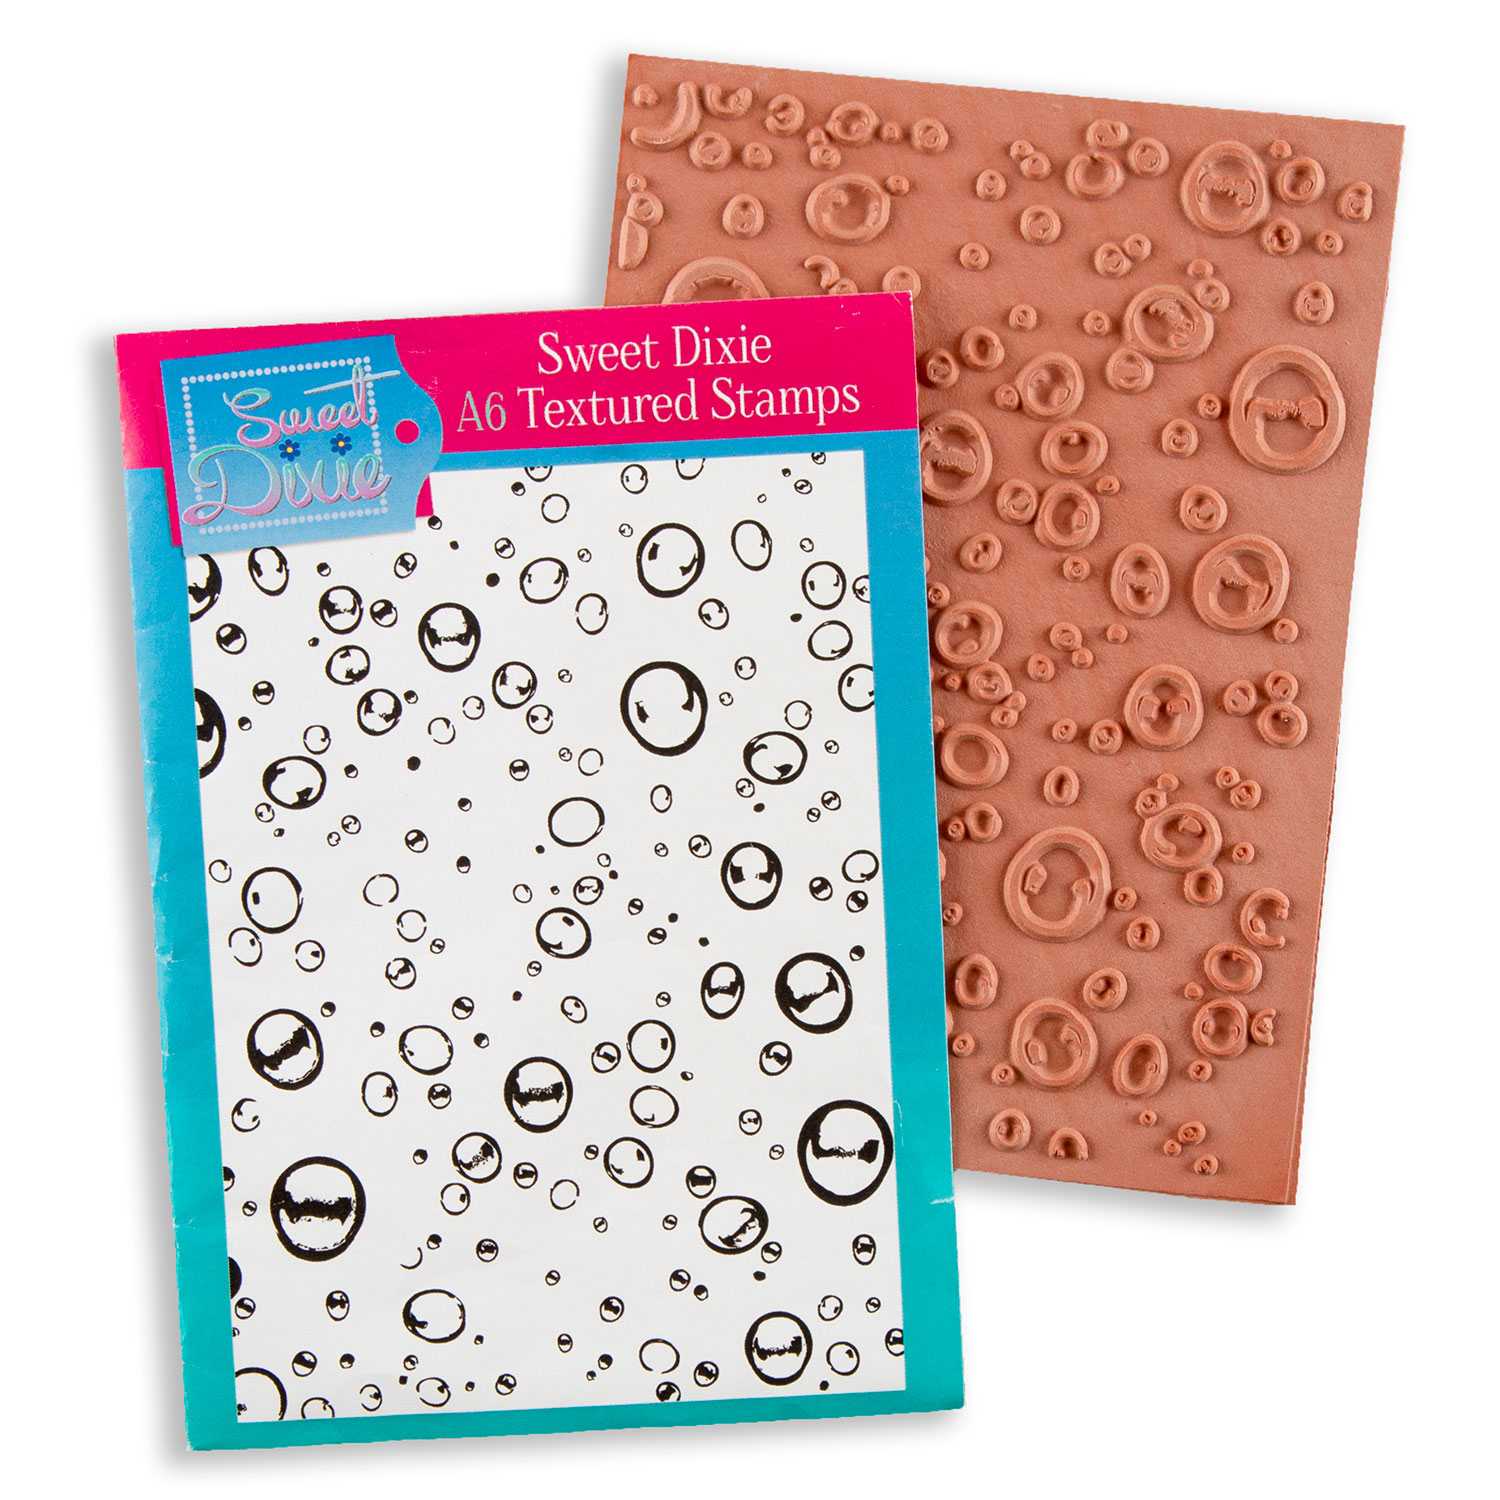 Sweet Dixie Texture Stamps Pick-n-Mix Choose 2 - Texture #2